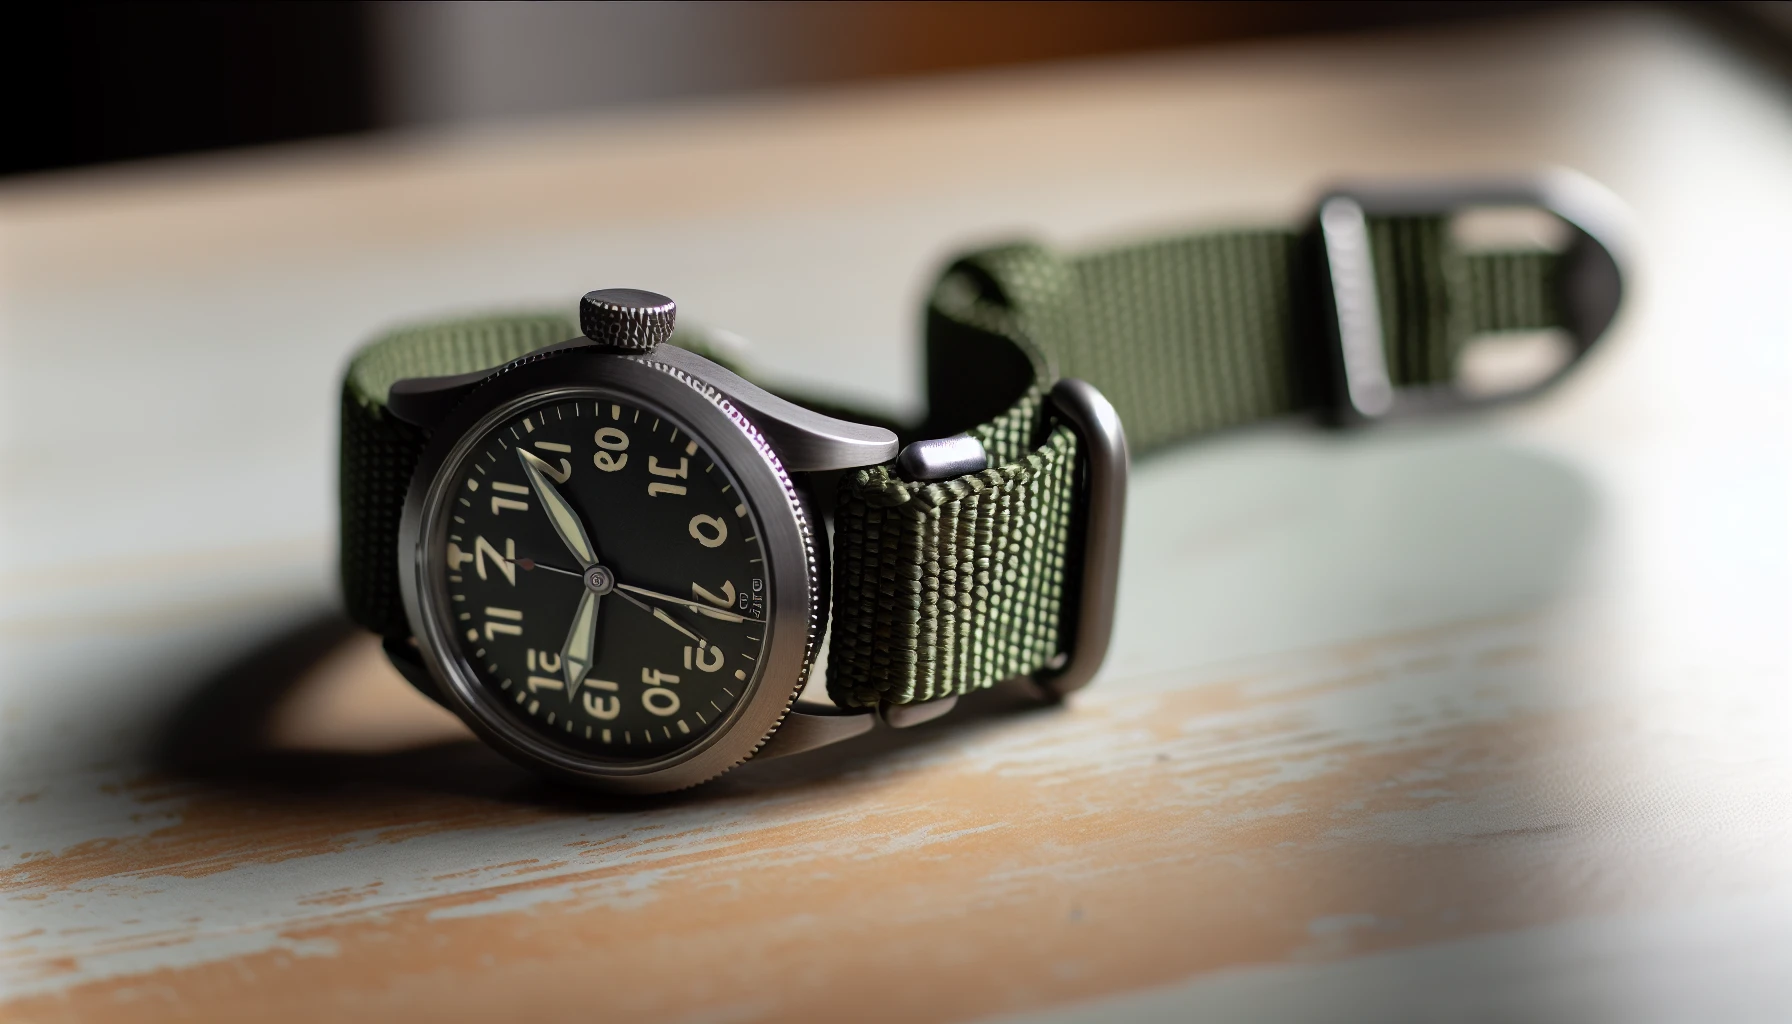 Vintage military watch with a green NATO strap